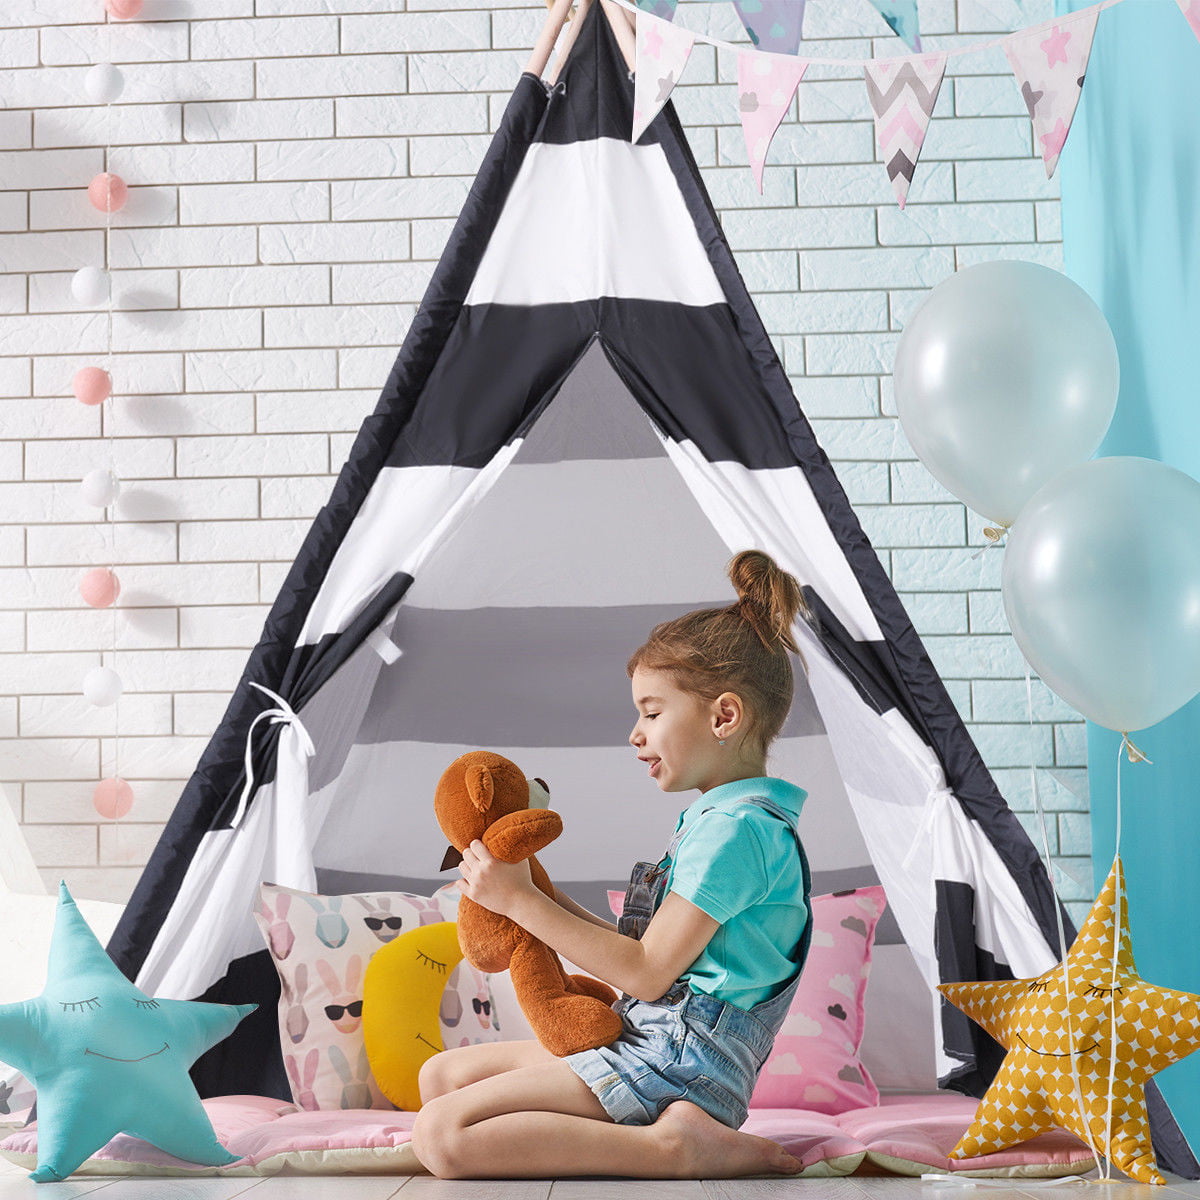 Details about   47in Children Indian Tent Teepee Play Sleeping Playhouse Indoor Outdoor Dome 